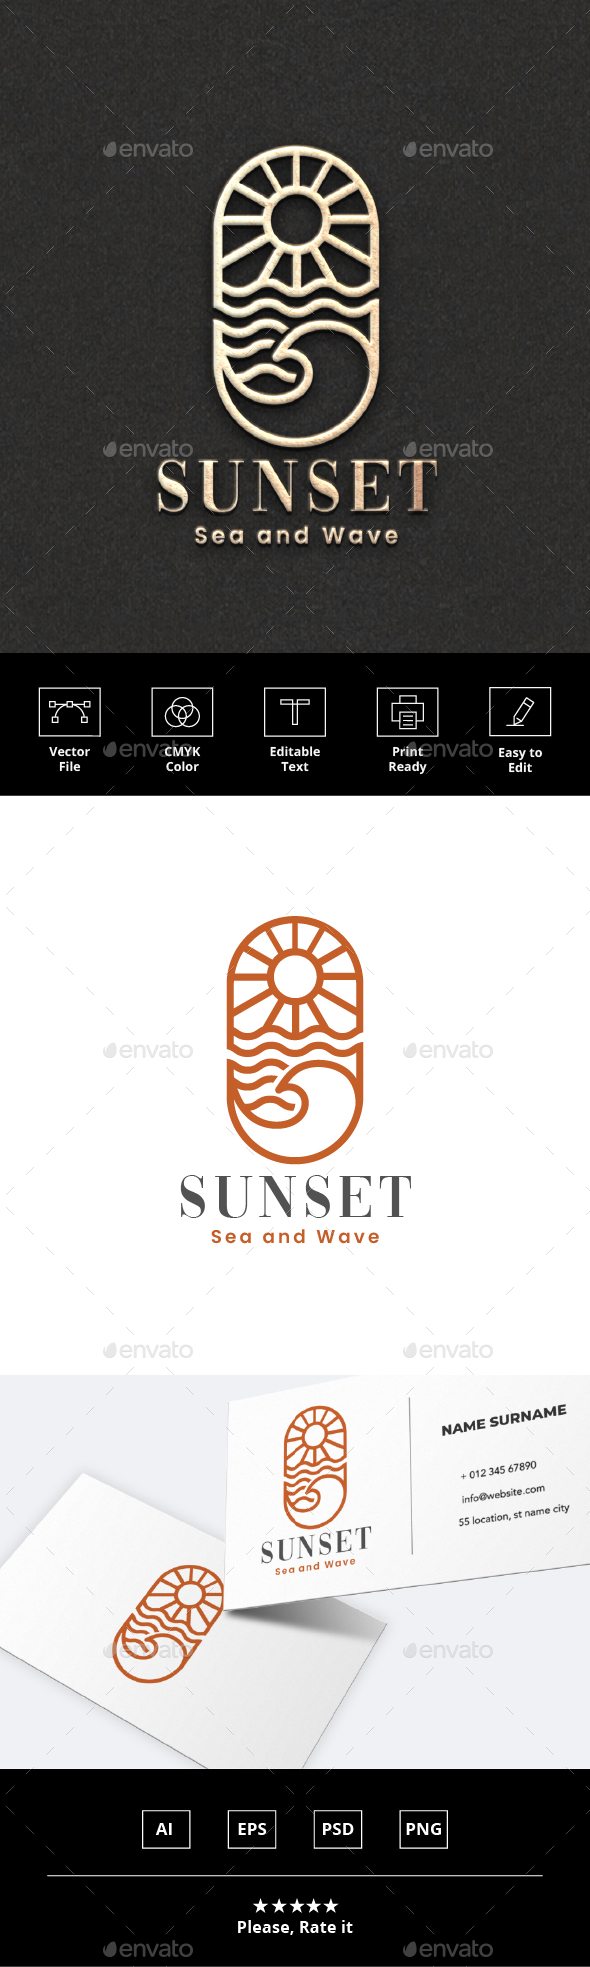 [DOWNLOAD]Sunset - Sea and Wave Logo